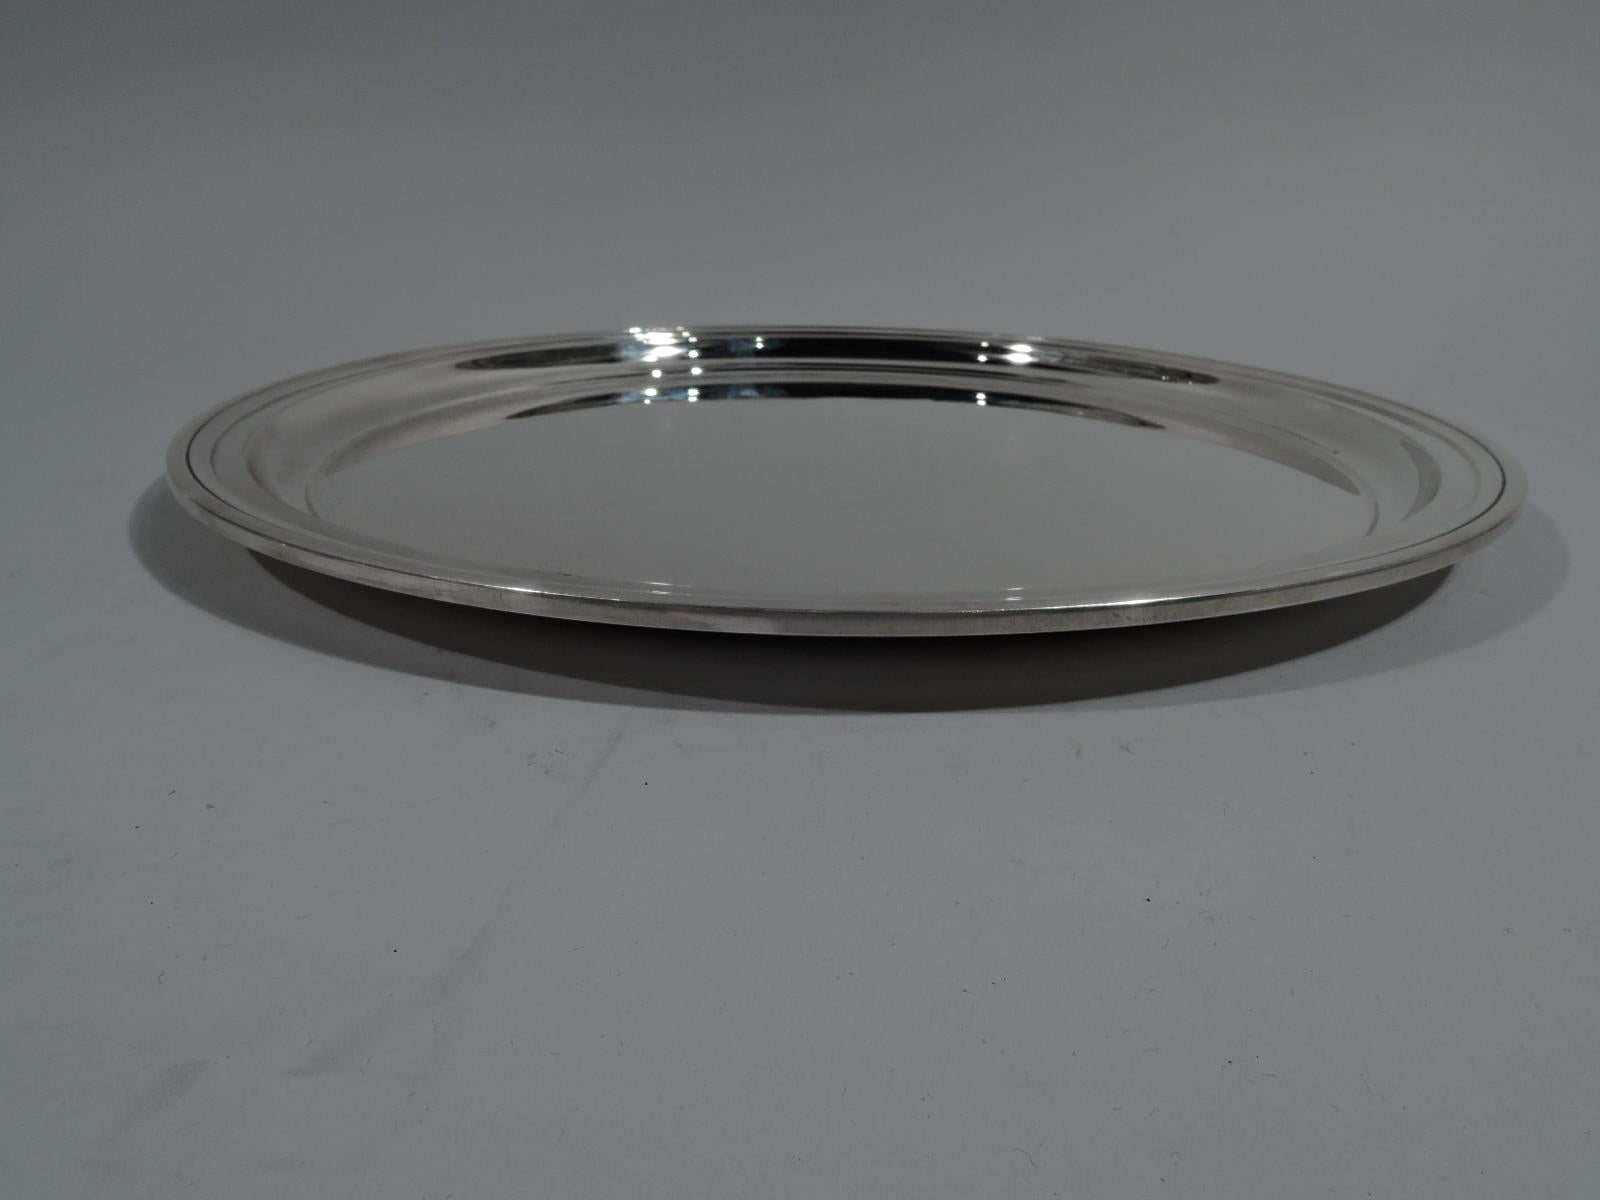 Modern sterling silver serving tray. Made by Tiffany & Co. in New York. Round well and molded rim. Nice heft and proportions. Fully marked including pattern no. 21244, director’s letter m (1907-47), wartime star (1943-5), and diameter. Weight: 30.5